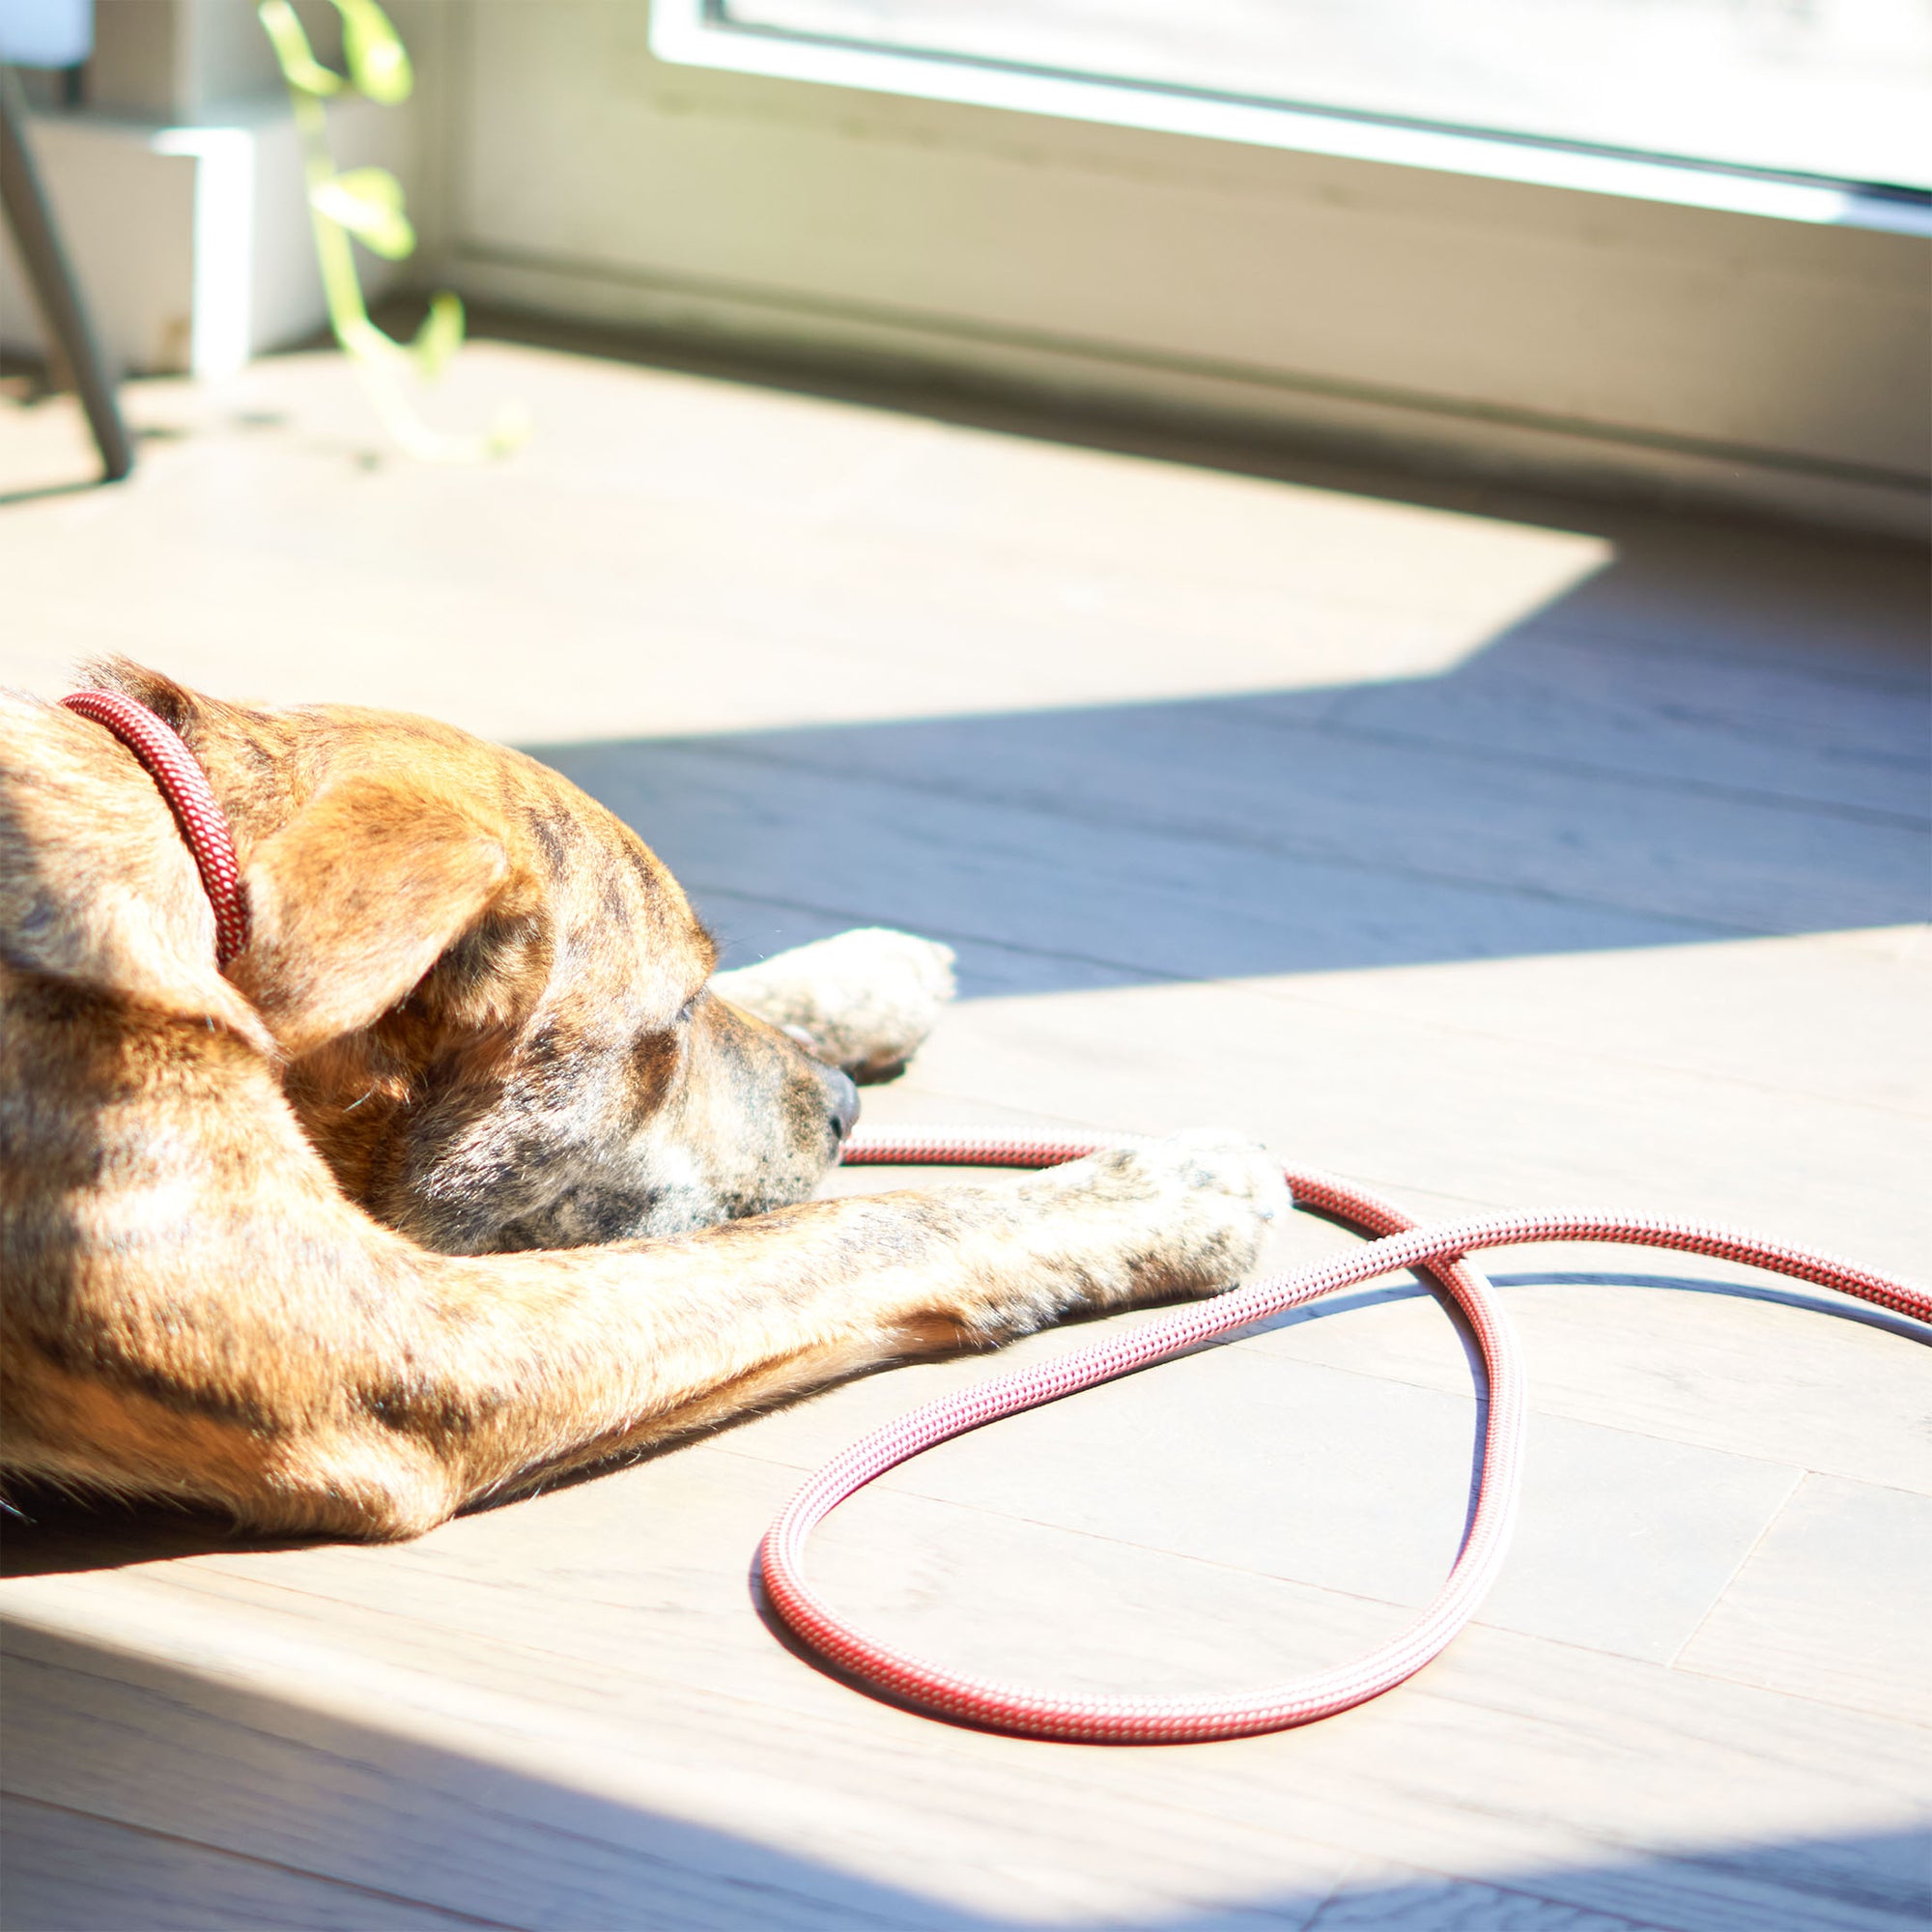 The image captures a brindle dog lying peacefully on the floor, bathed in sunlight. The dog is near a red leash, which suggests a moment of rest before or after a walk. The warm lighting and the dog's relaxed posture contribute to a serene and contented scene.